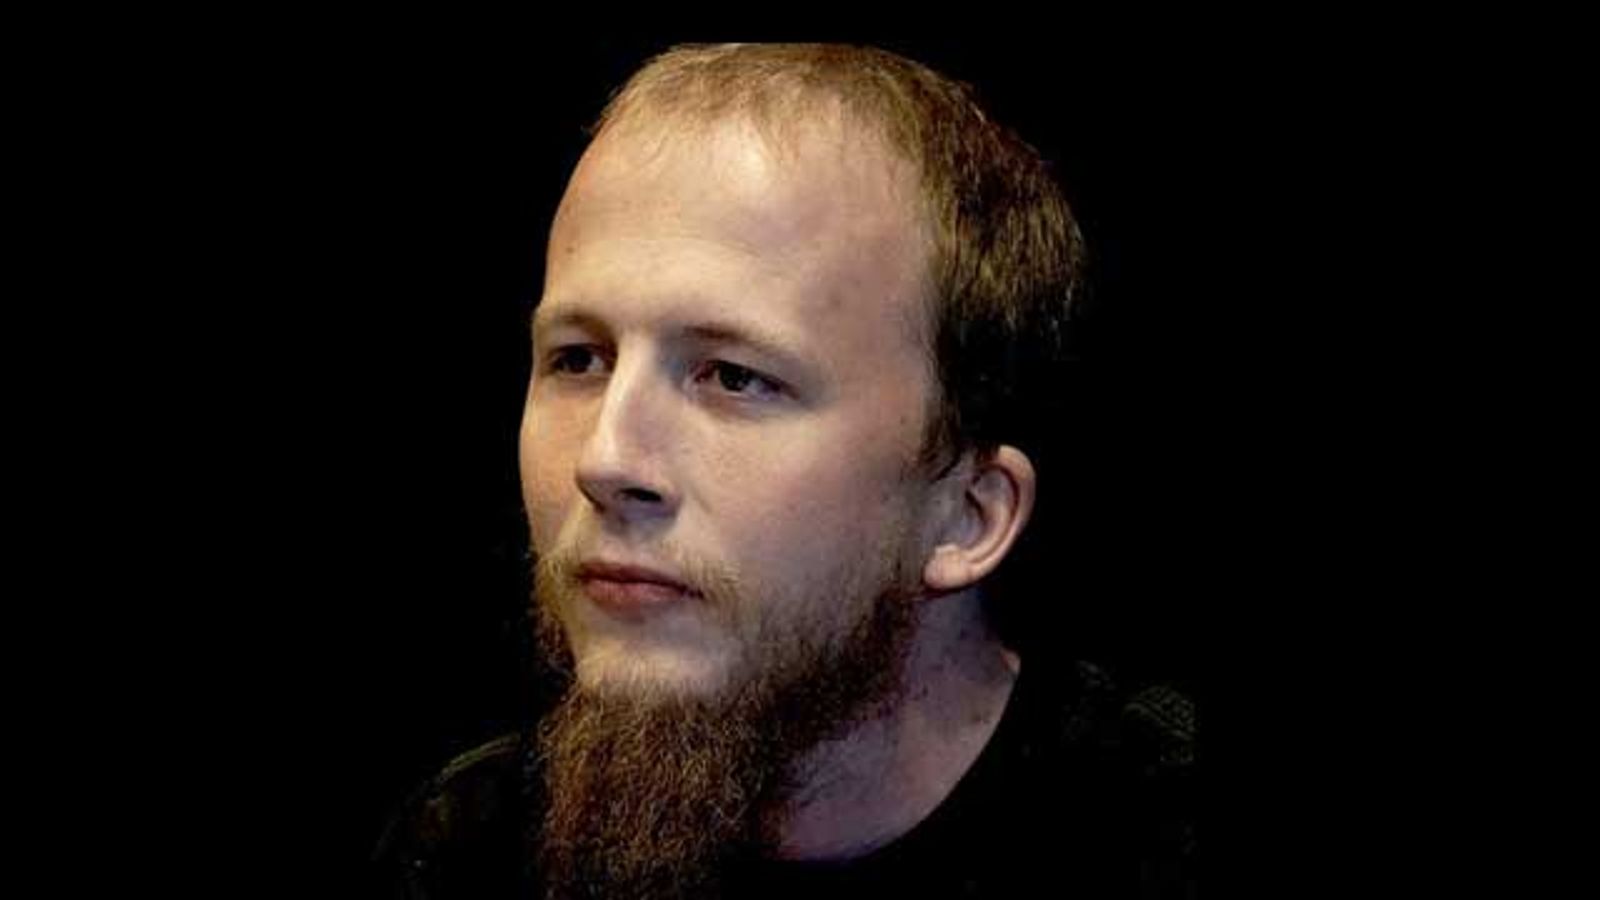 Pirate Bay Co-founder Gets Two Year Sentence for Bank Hack